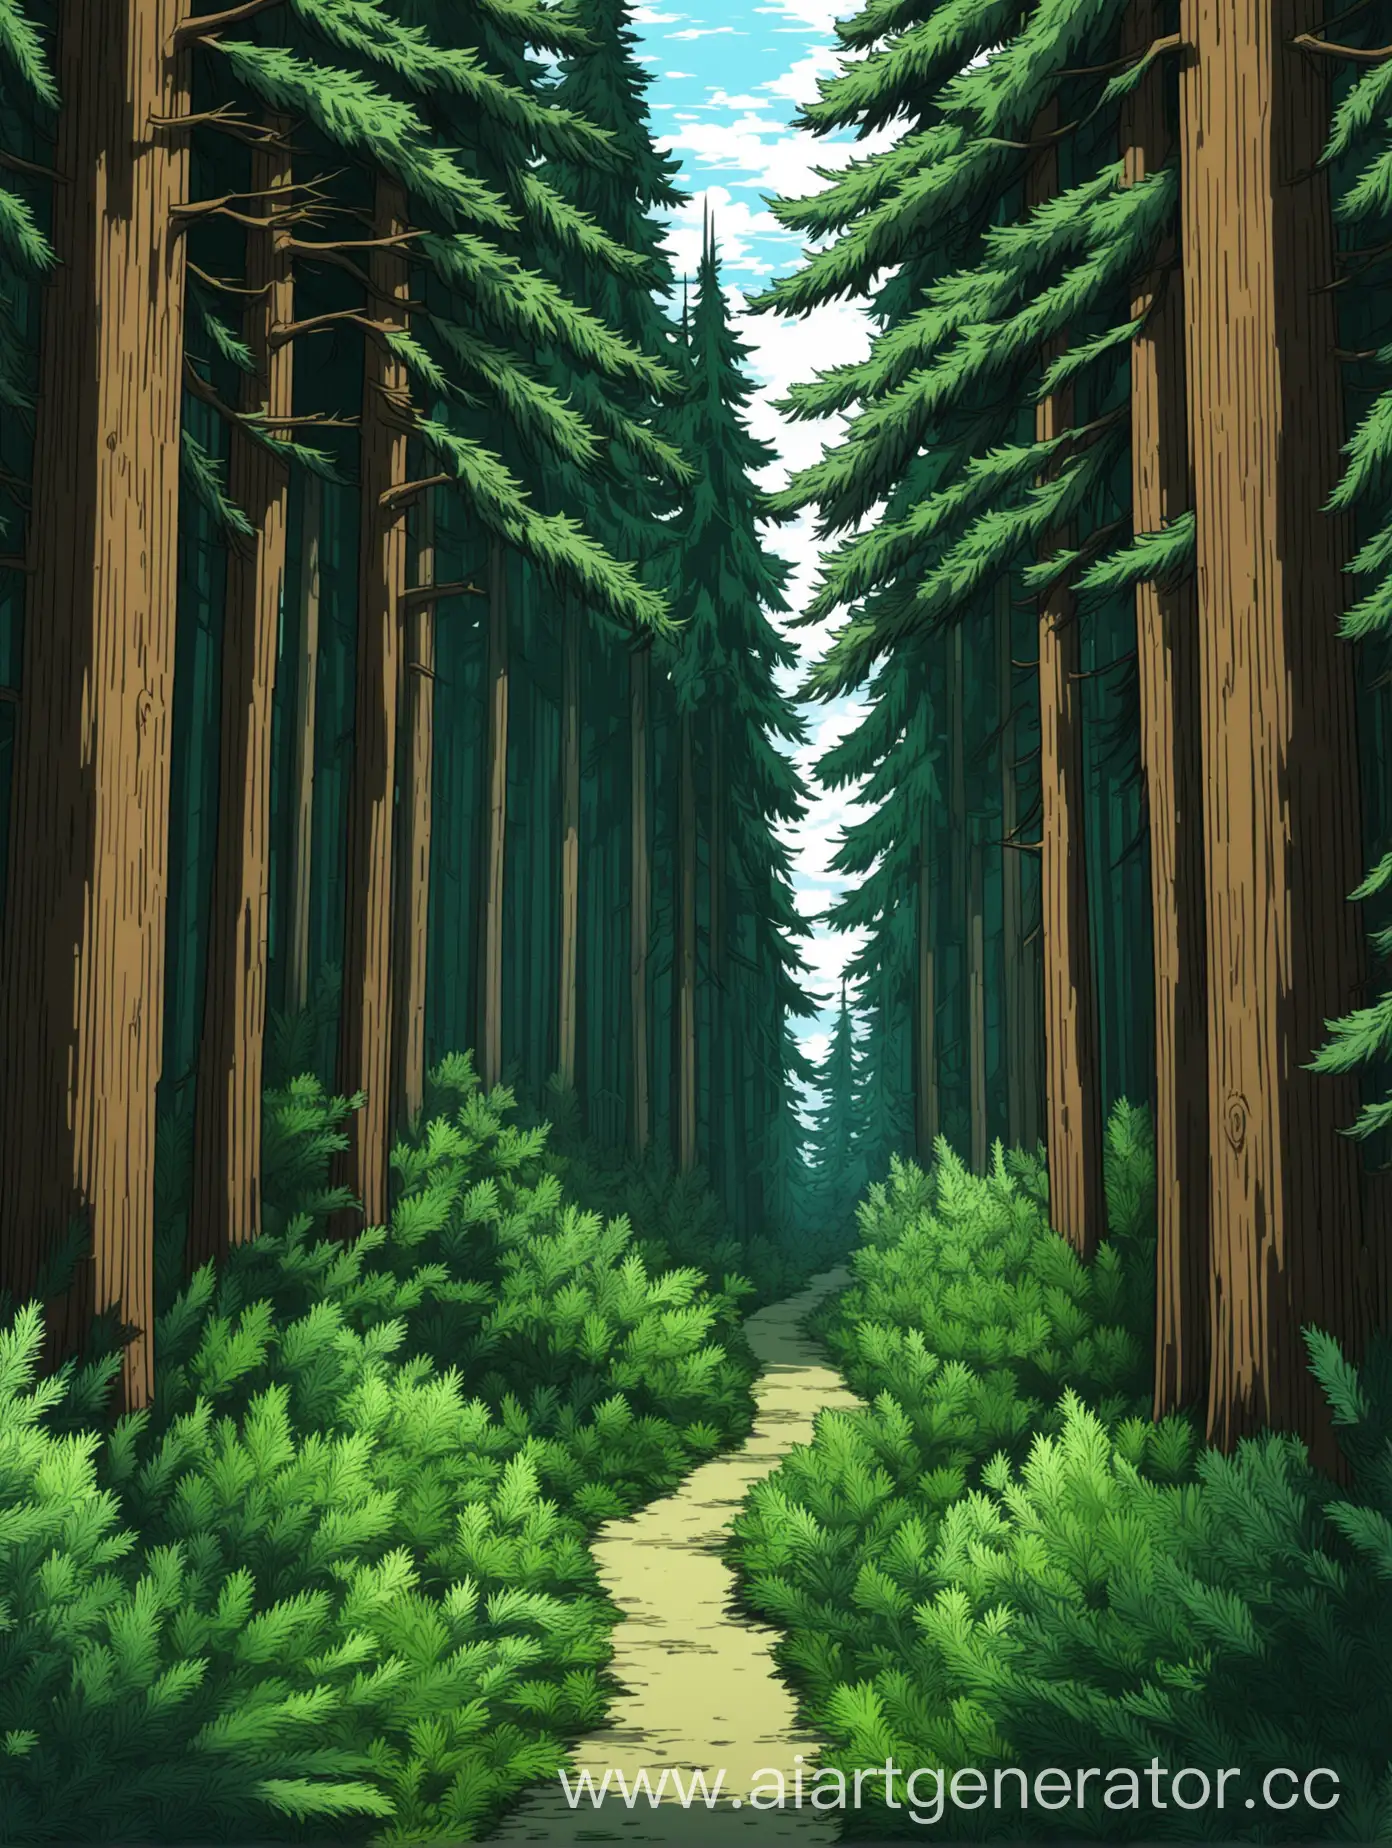 Enchanted-Anime-Forest-with-Towering-Coniferous-Trees-and-Overgrown-Path